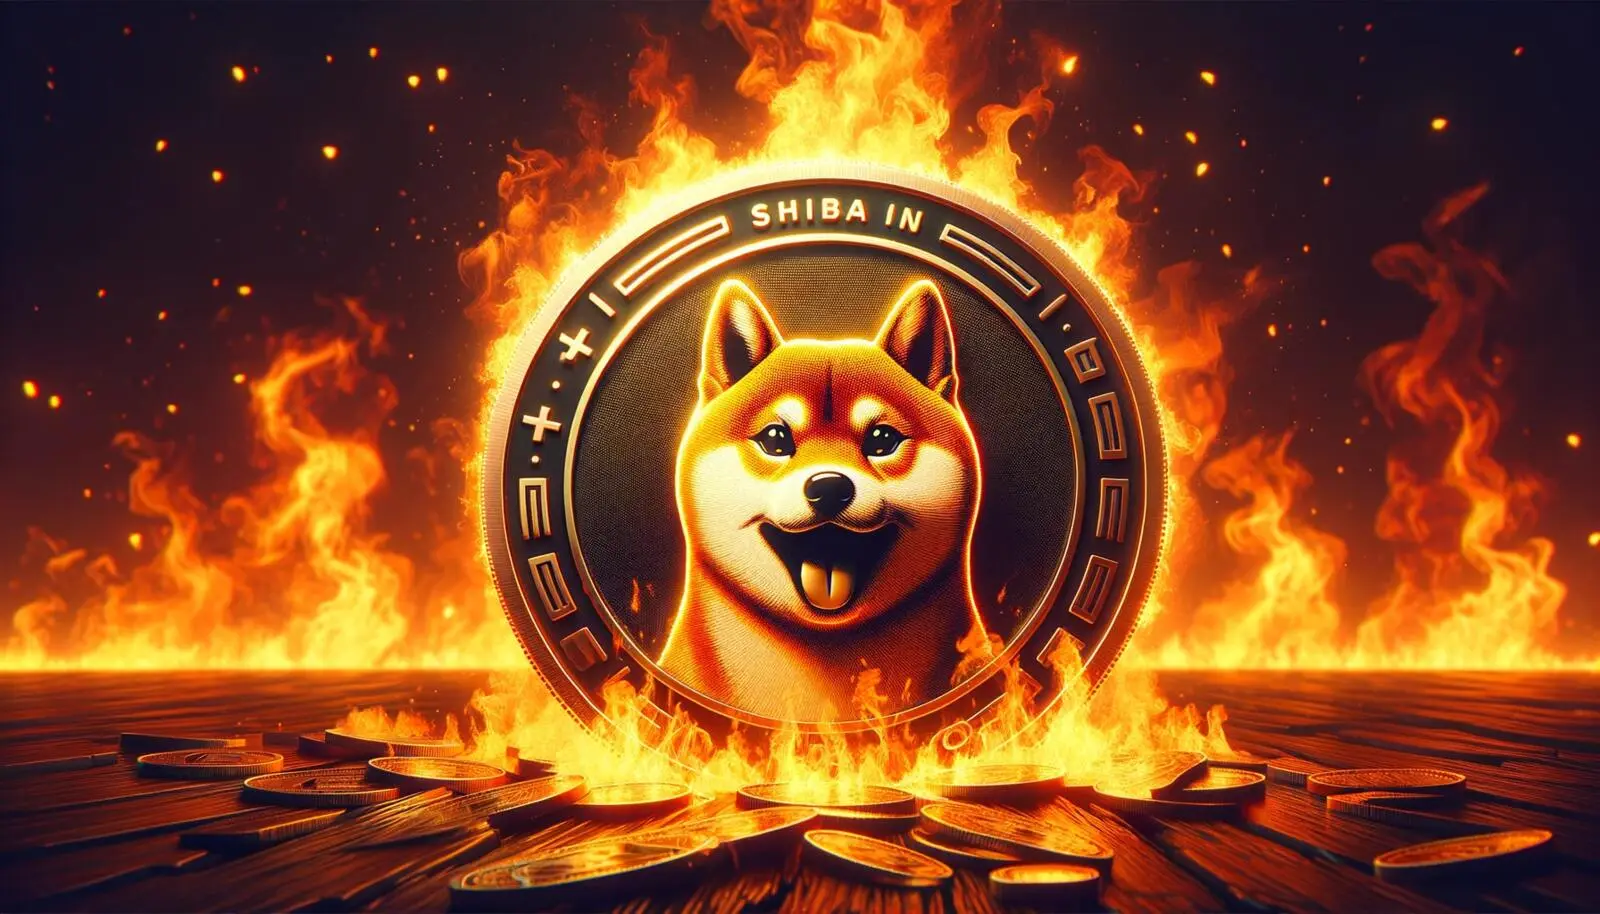 Shiba Inu Team Prepares To Go On Massive Burn Spree, These 4 Assets Are The Targets